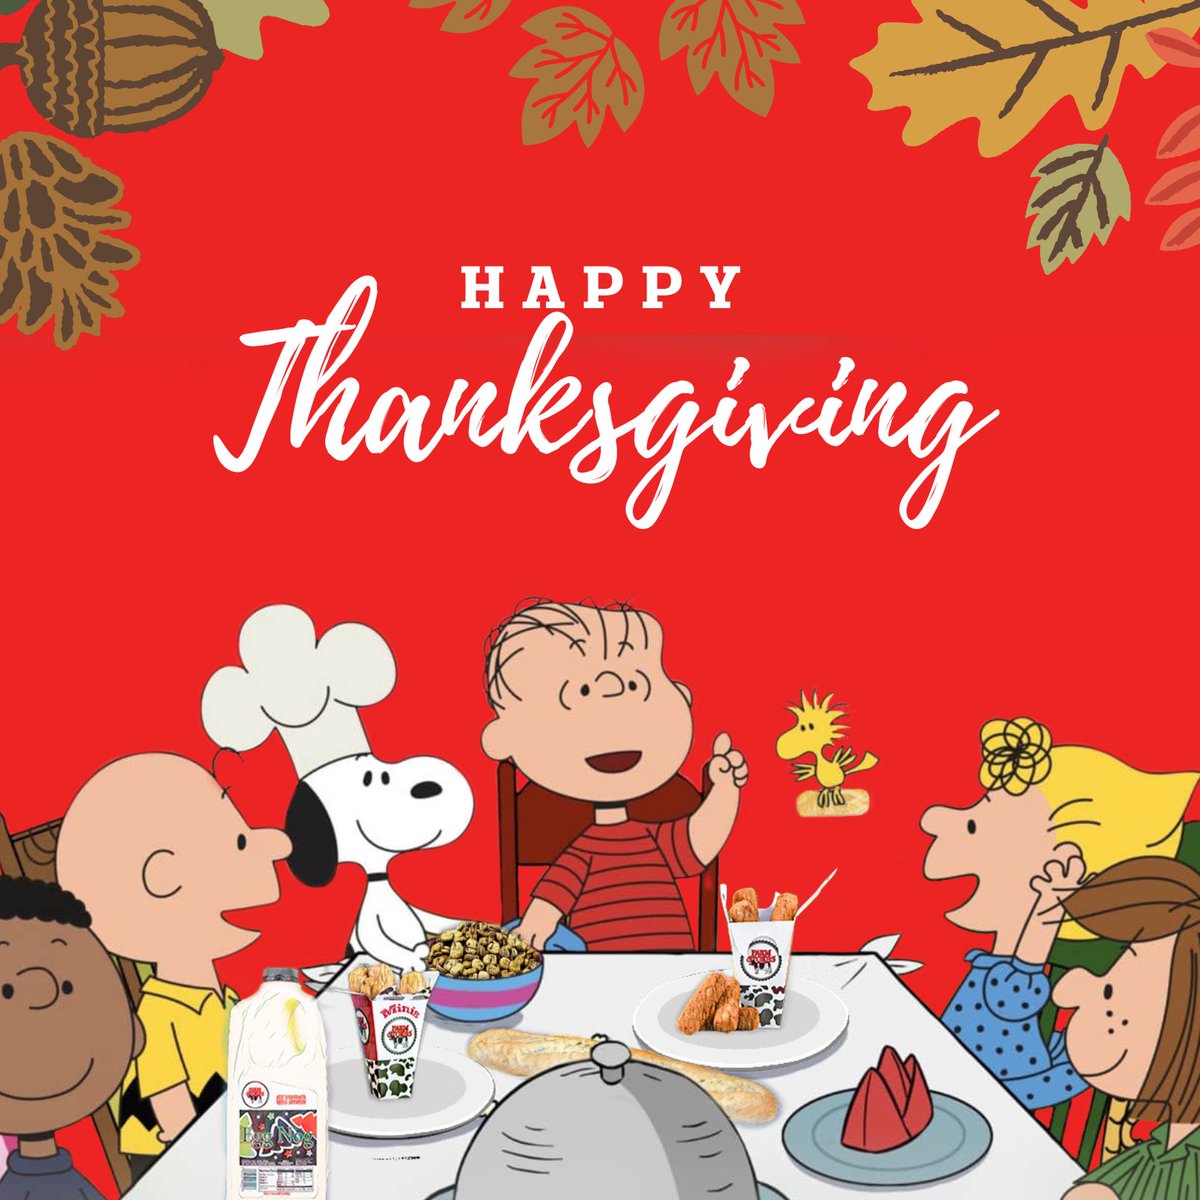 Happy Thanksgiving from our family to yours! Today we are especially thankful for all of you, our loyal customers and partners nationwide that continue to support our growth. Thank you. #thanksgiving #farmstores #happyholidays #lavaquita